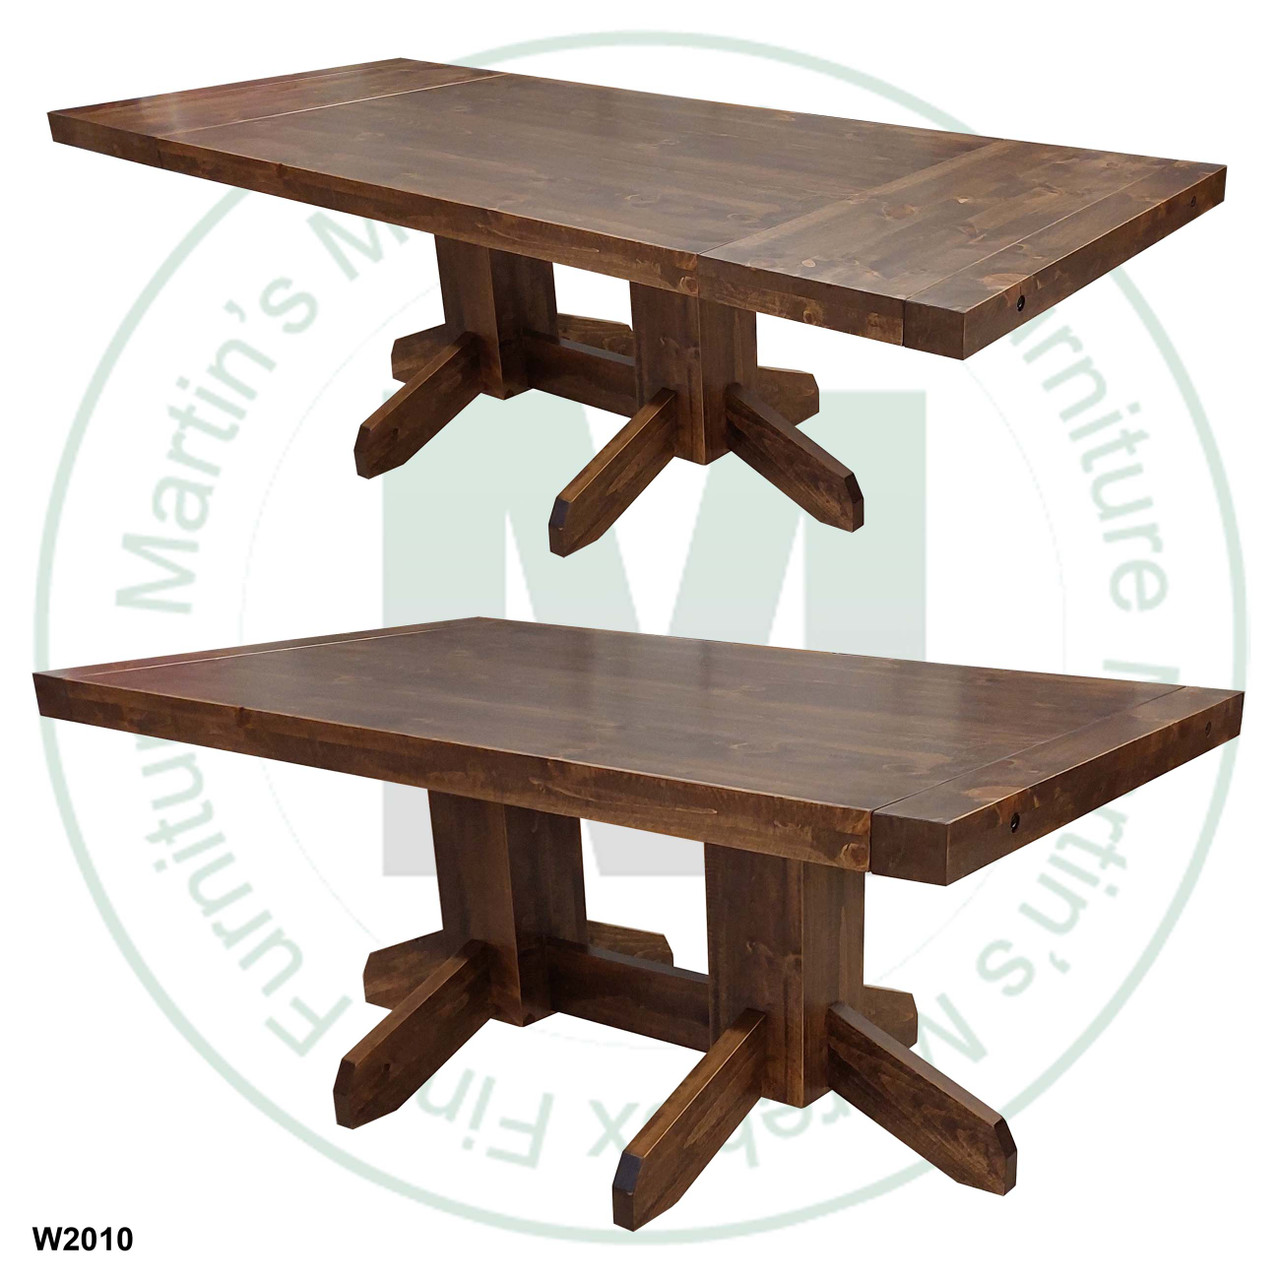 Wormy Maple Yukon Solid Top Double Pedestal Table 48'' Deep x 72'' Wide x 30'' High With 2 - 16'' End Leaves